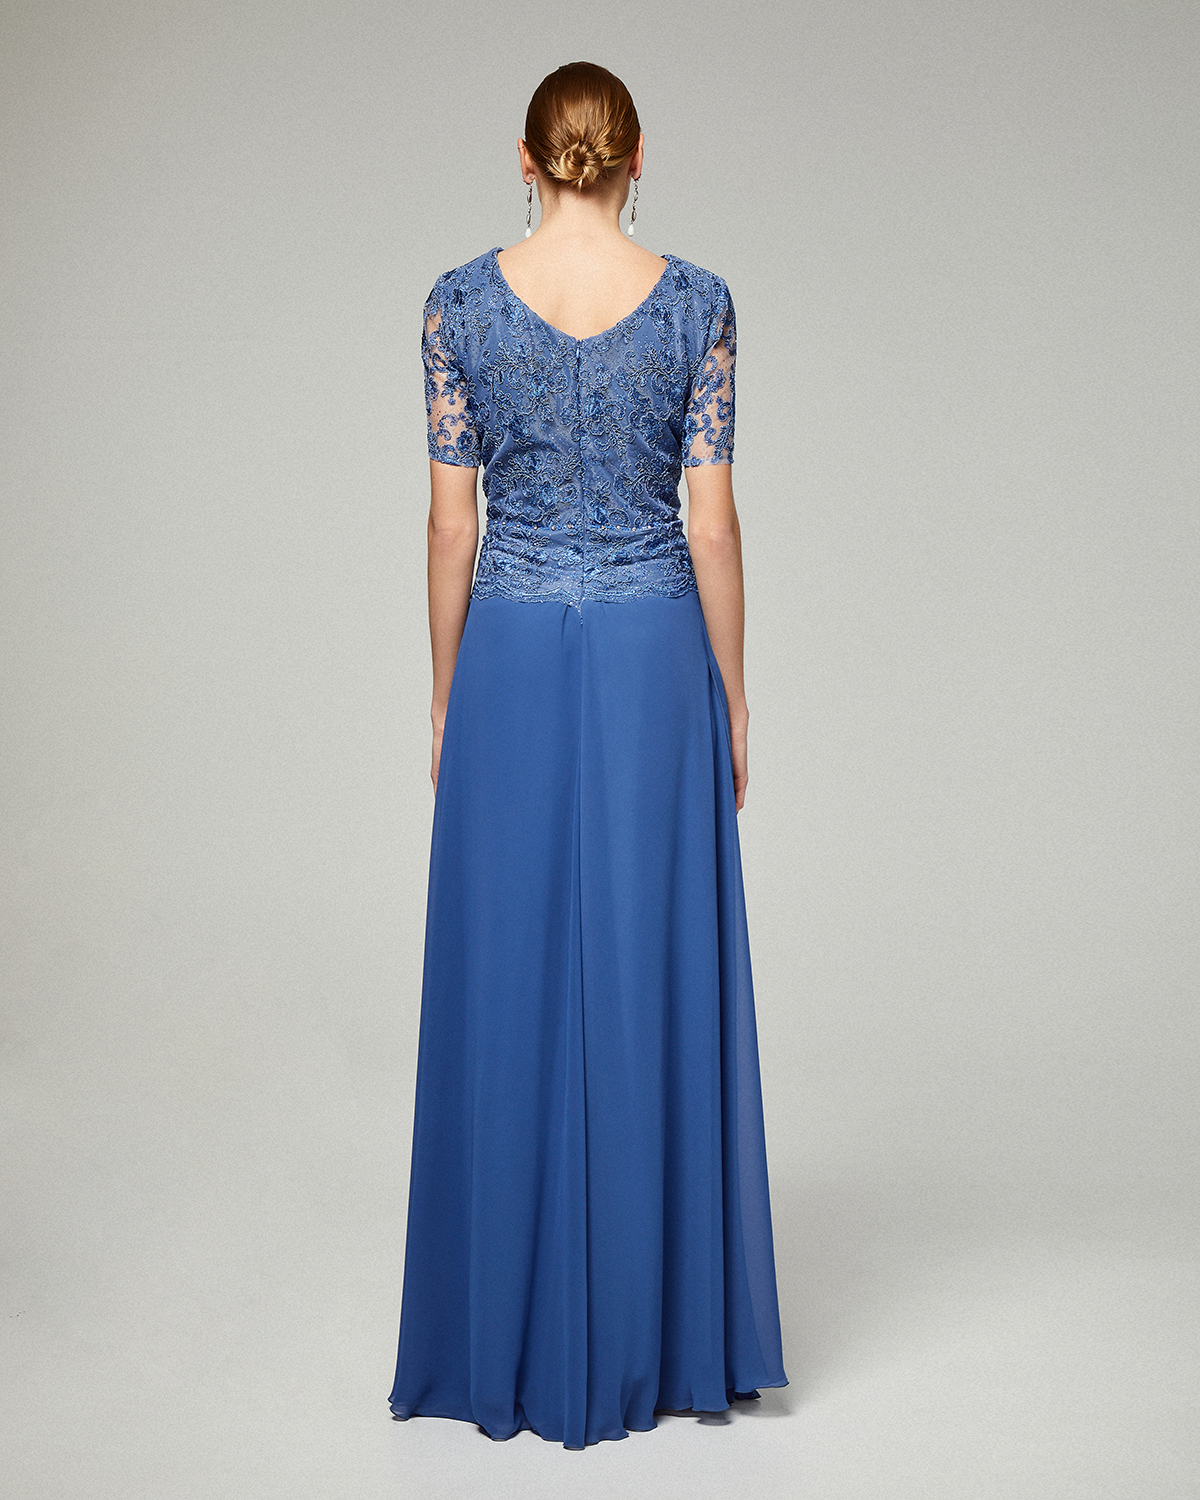 Classic Dresses / Long chiffon dress with  beaded lace top and short sleeves